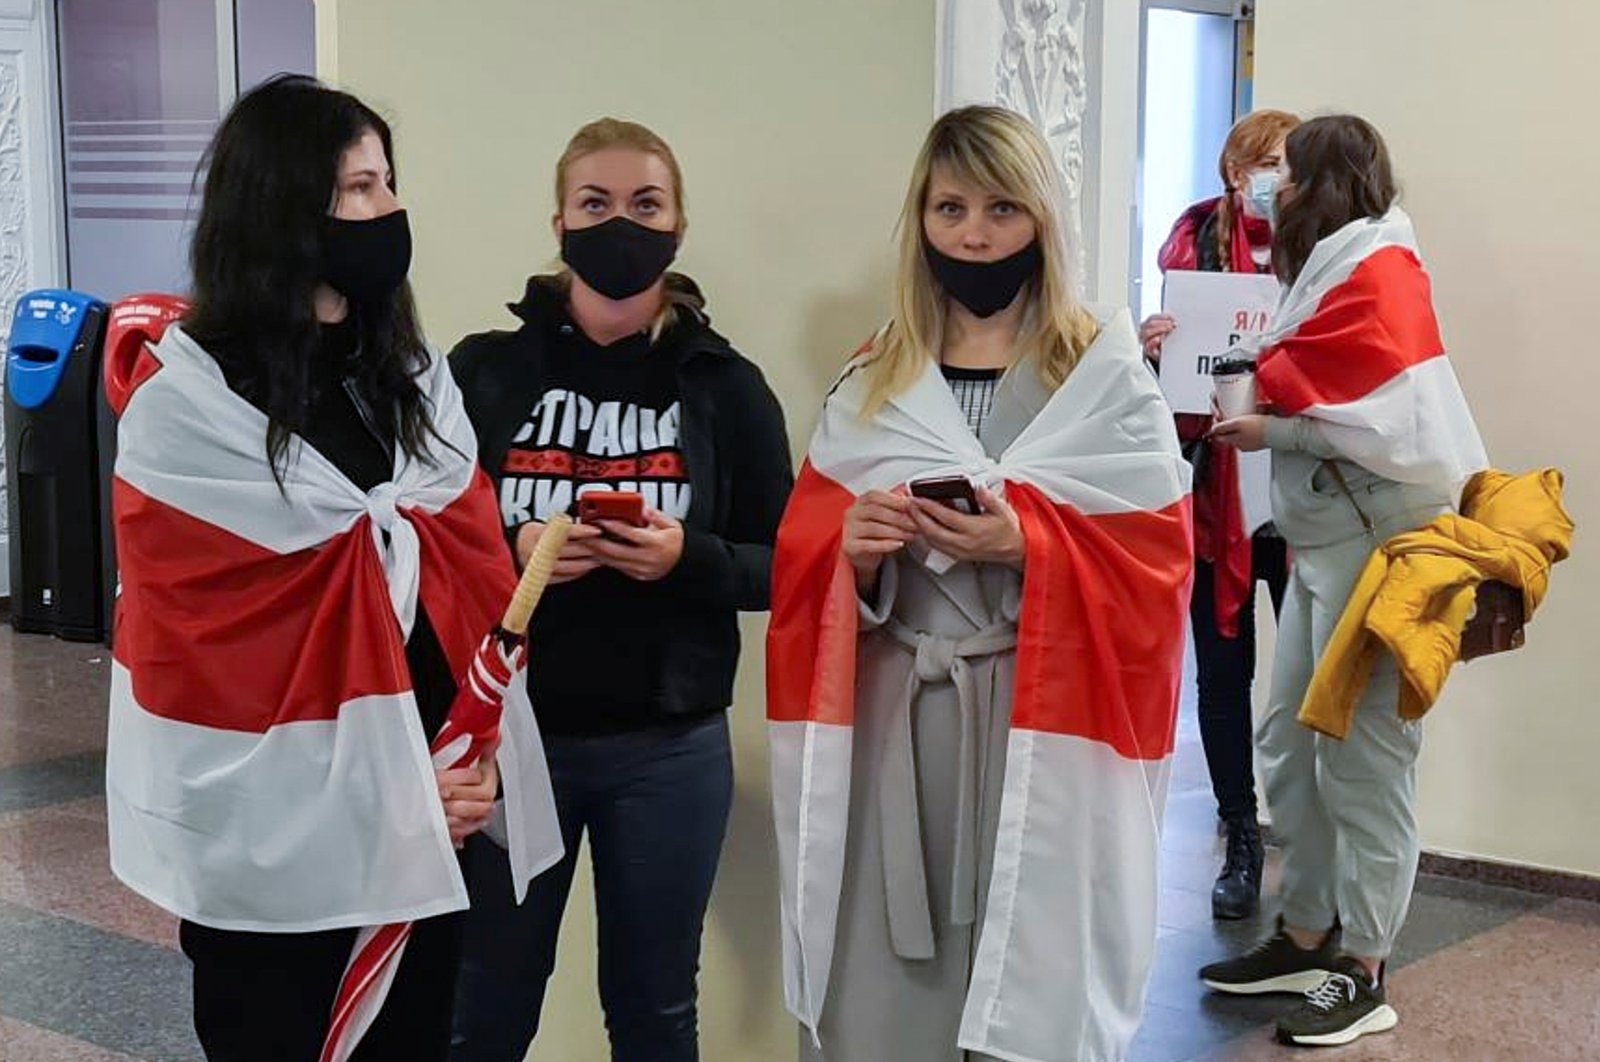 Supporters of Belarusian opposition blogger and activist Roman Protasevich wait for the arrival of a Ryanair flight after it was diverted to Belarus at Vilnius Airport in Vilnius, Lithuania May 23, 2021. (Reuters Photo)